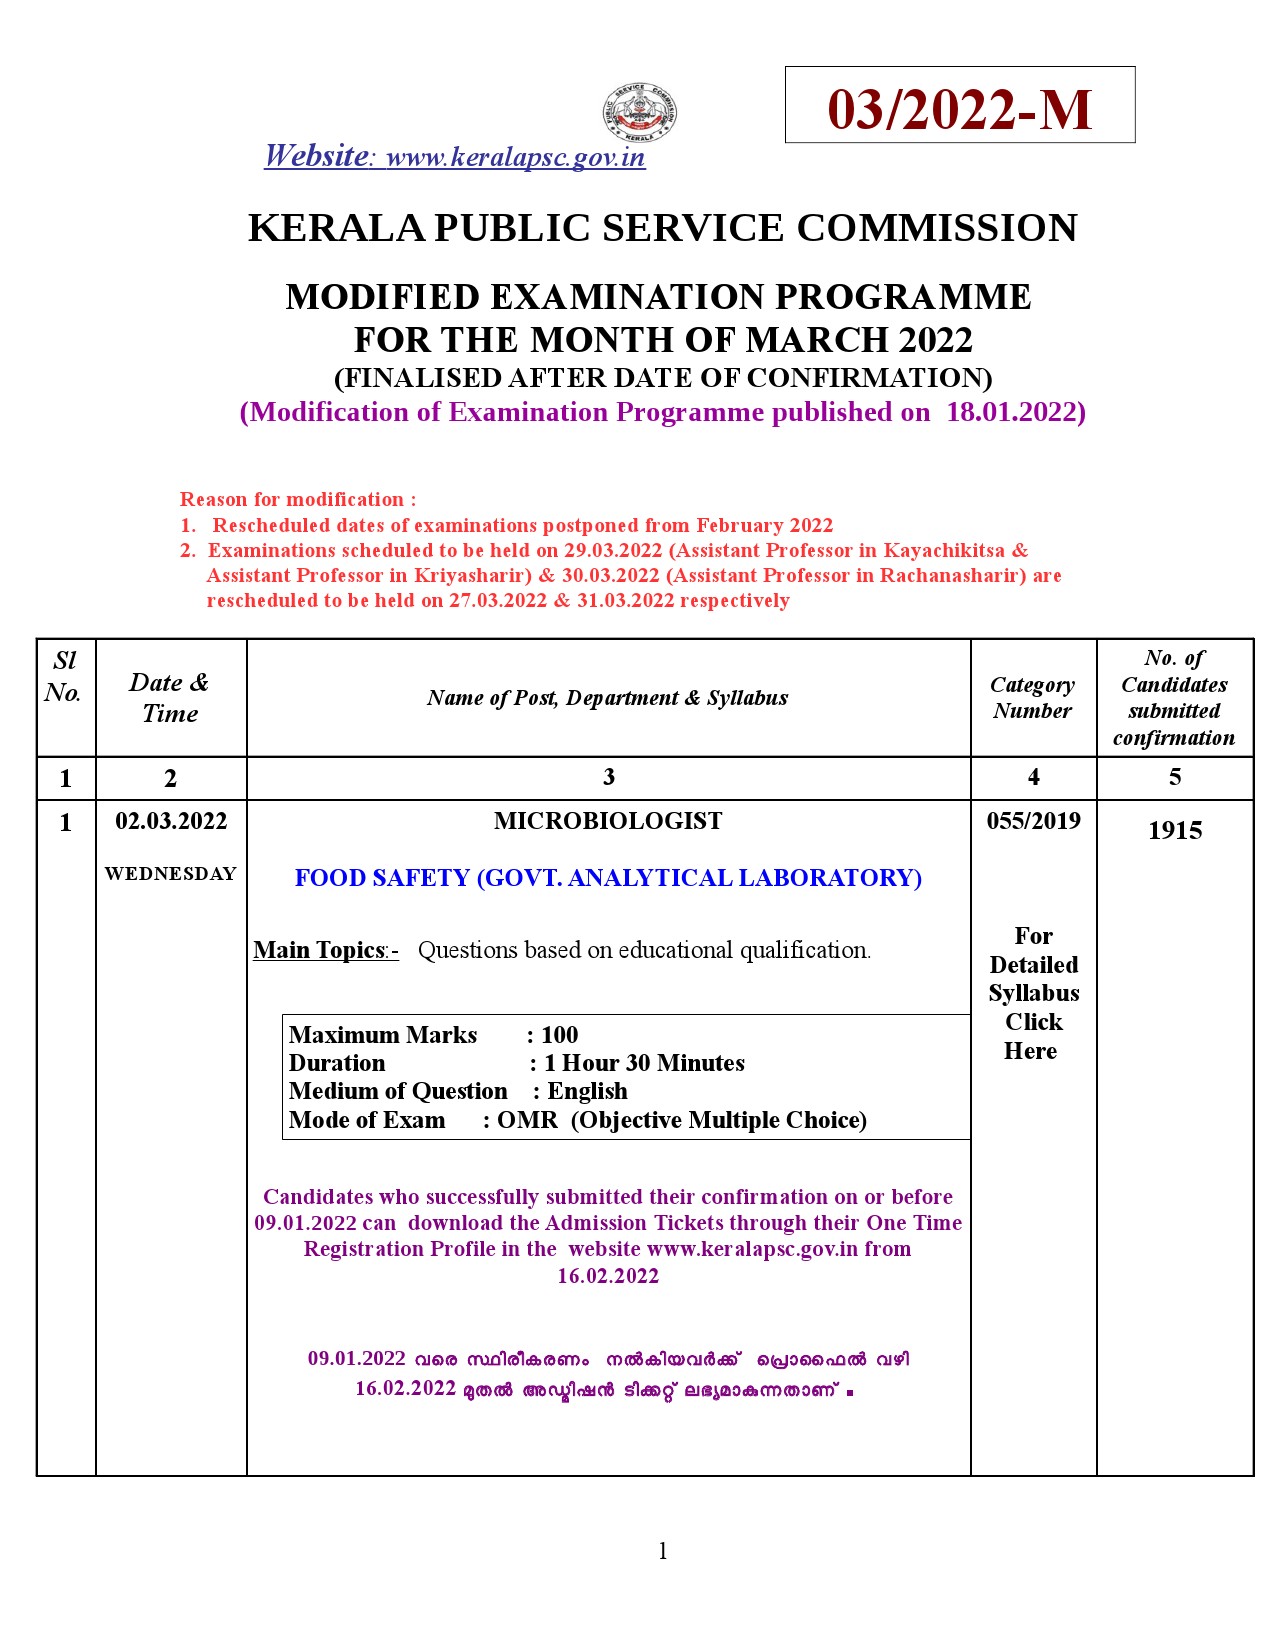 Modified Examination Programme For The Month Of March 2022 - Notification Image 1